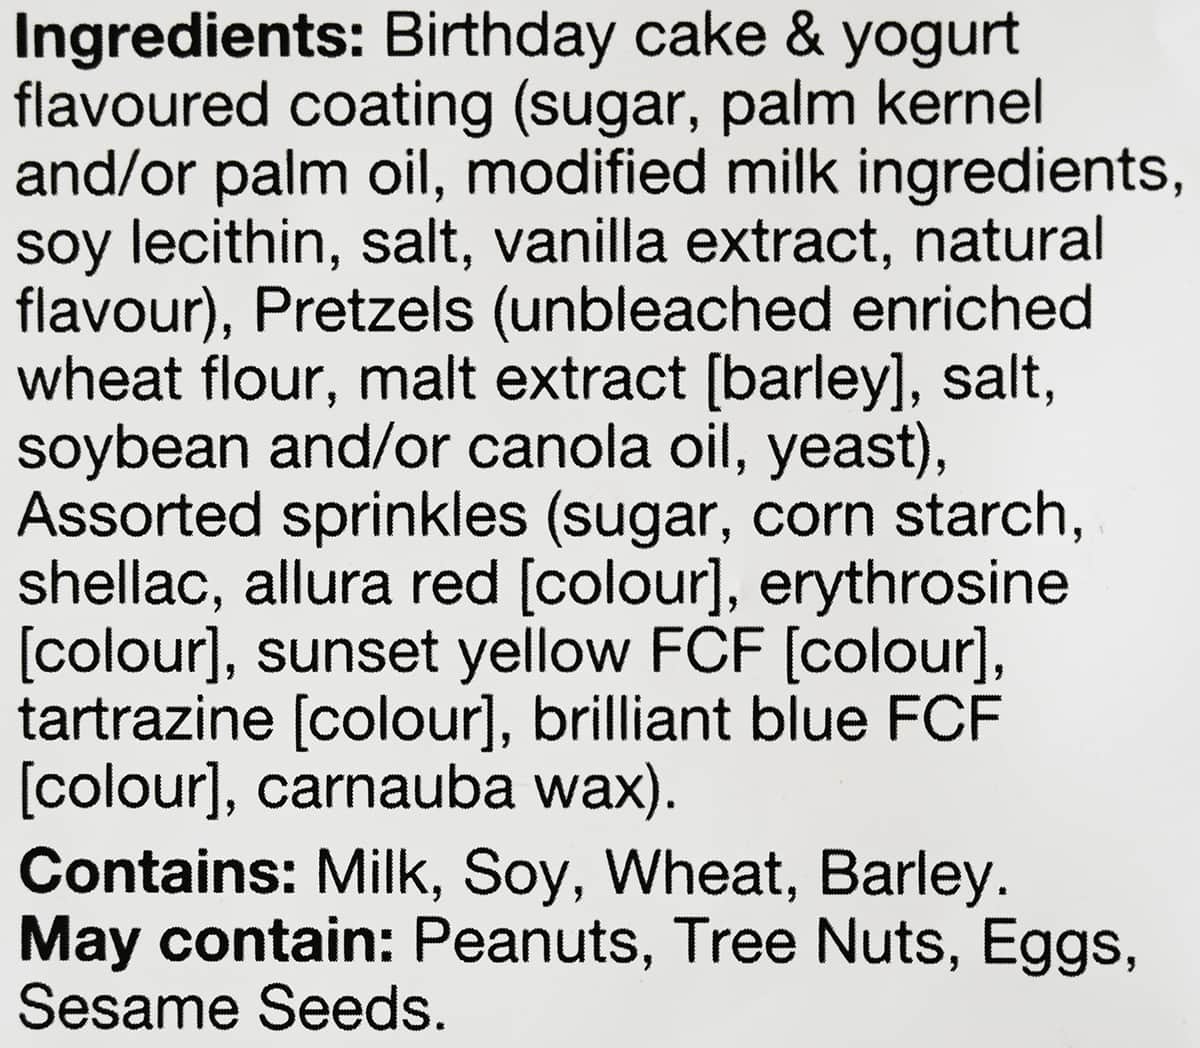 Image of the birthday cake & yogurt pretzel ingredients from the package.